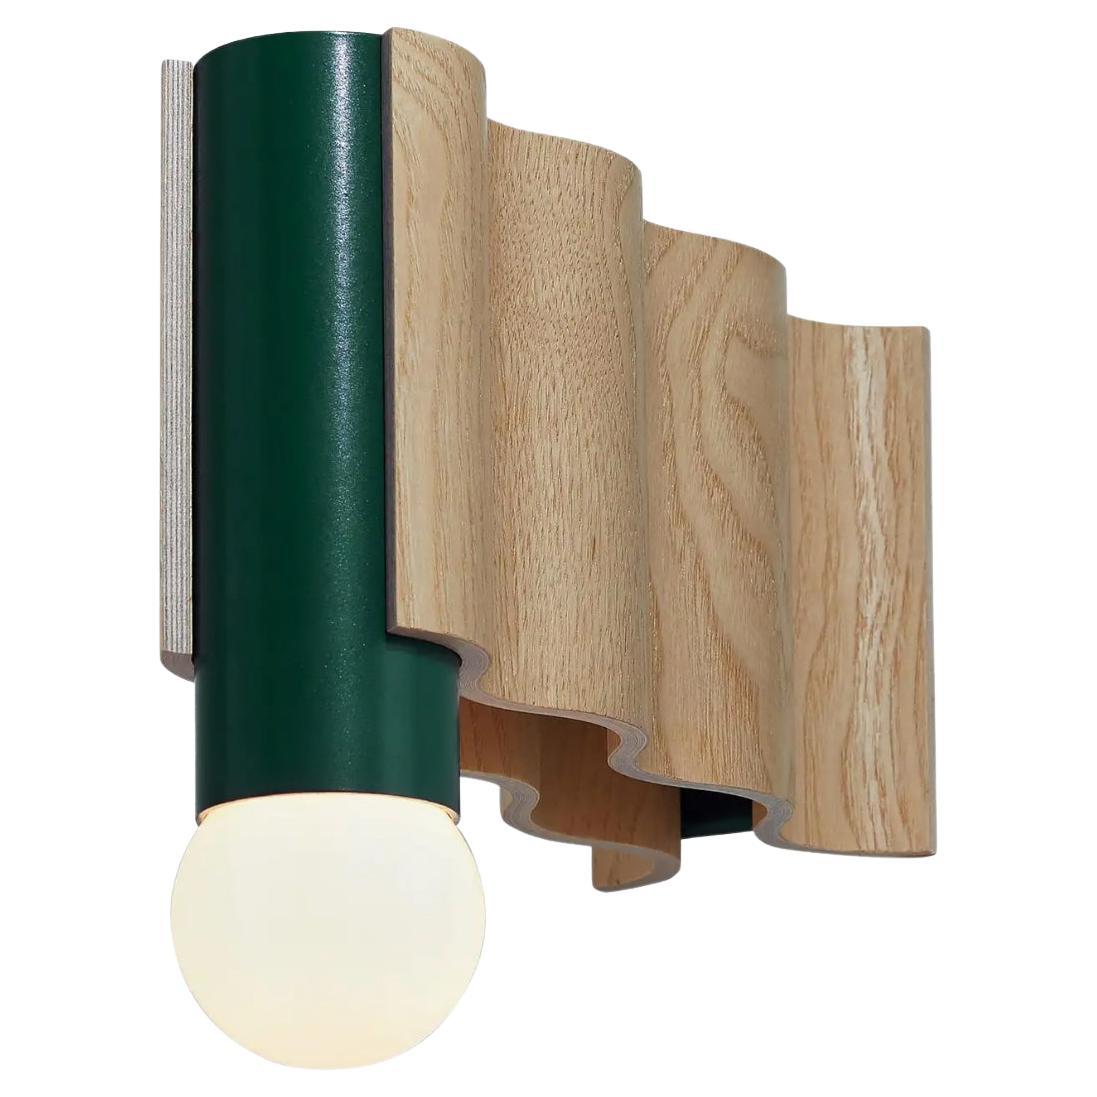 Single Corrugation Sconce / Wall Light in Natural Ash Veneer and Moss Green For Sale